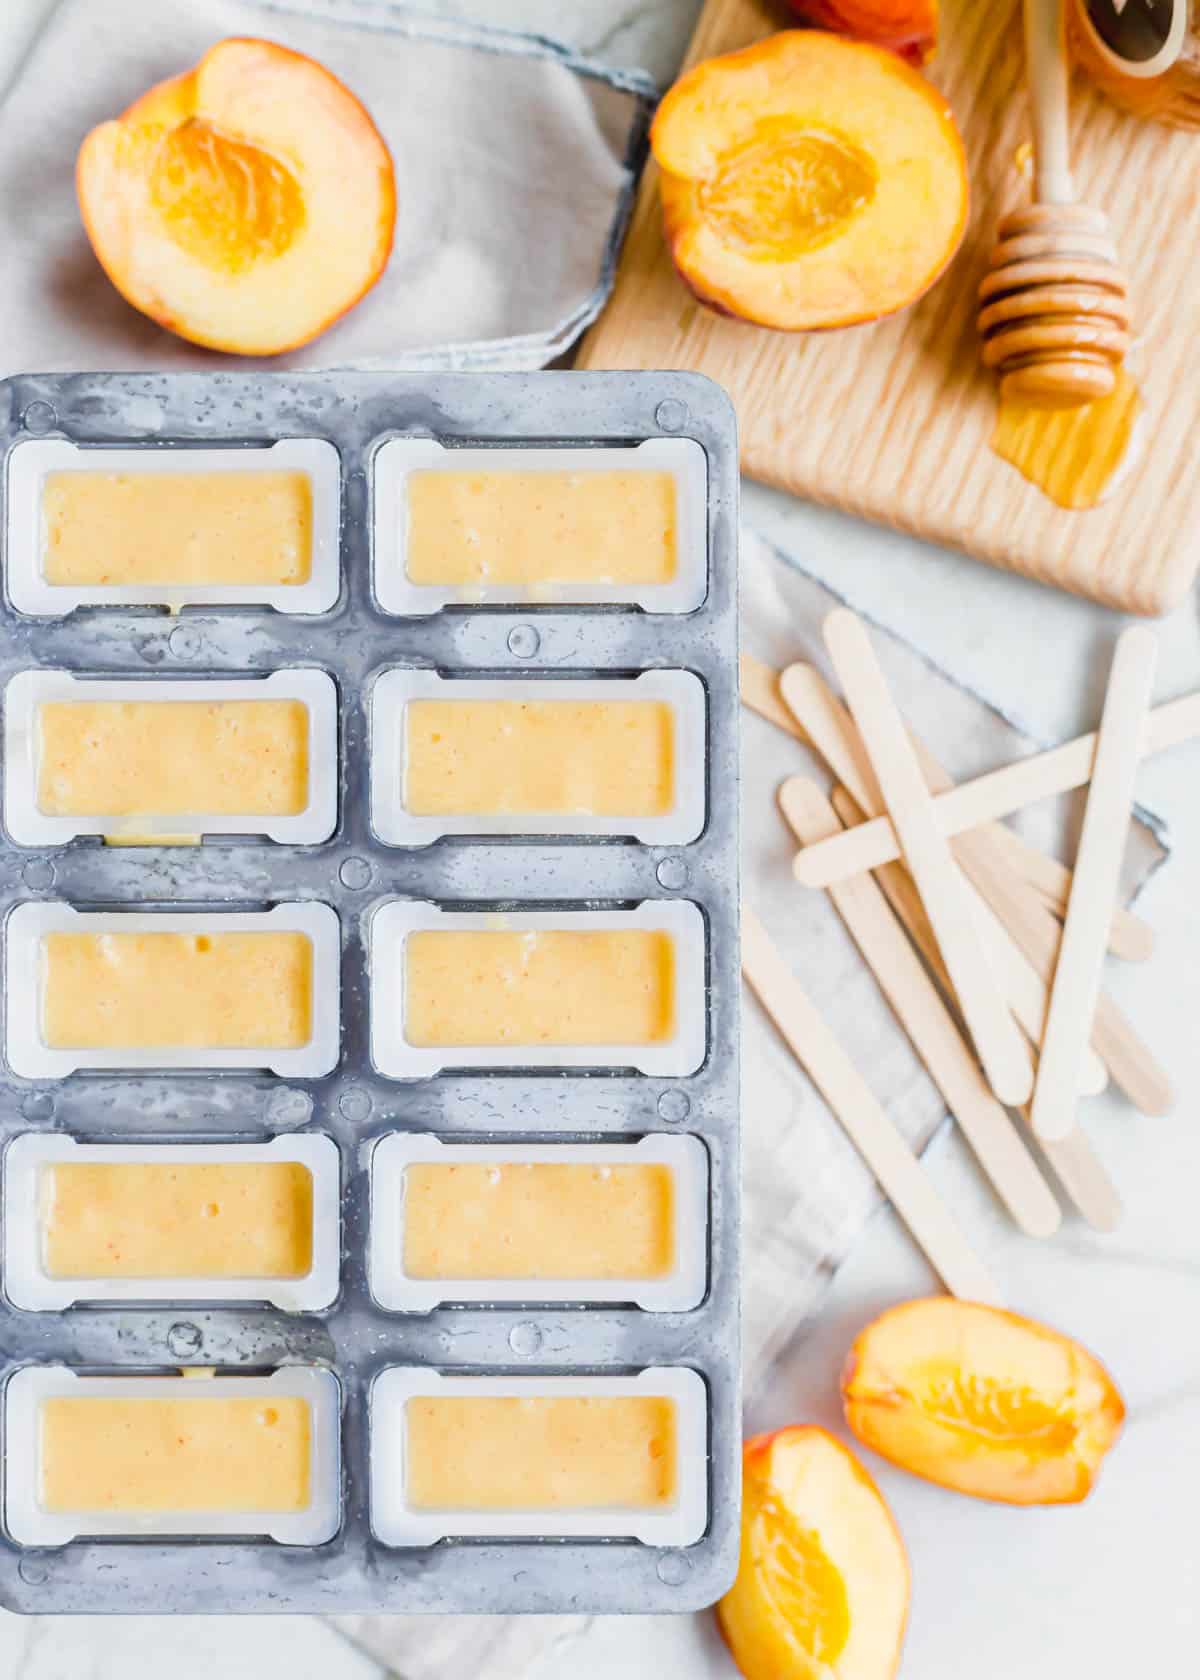 A popsicle mold filled with creamy peach filling with ice pop sticks on the side.